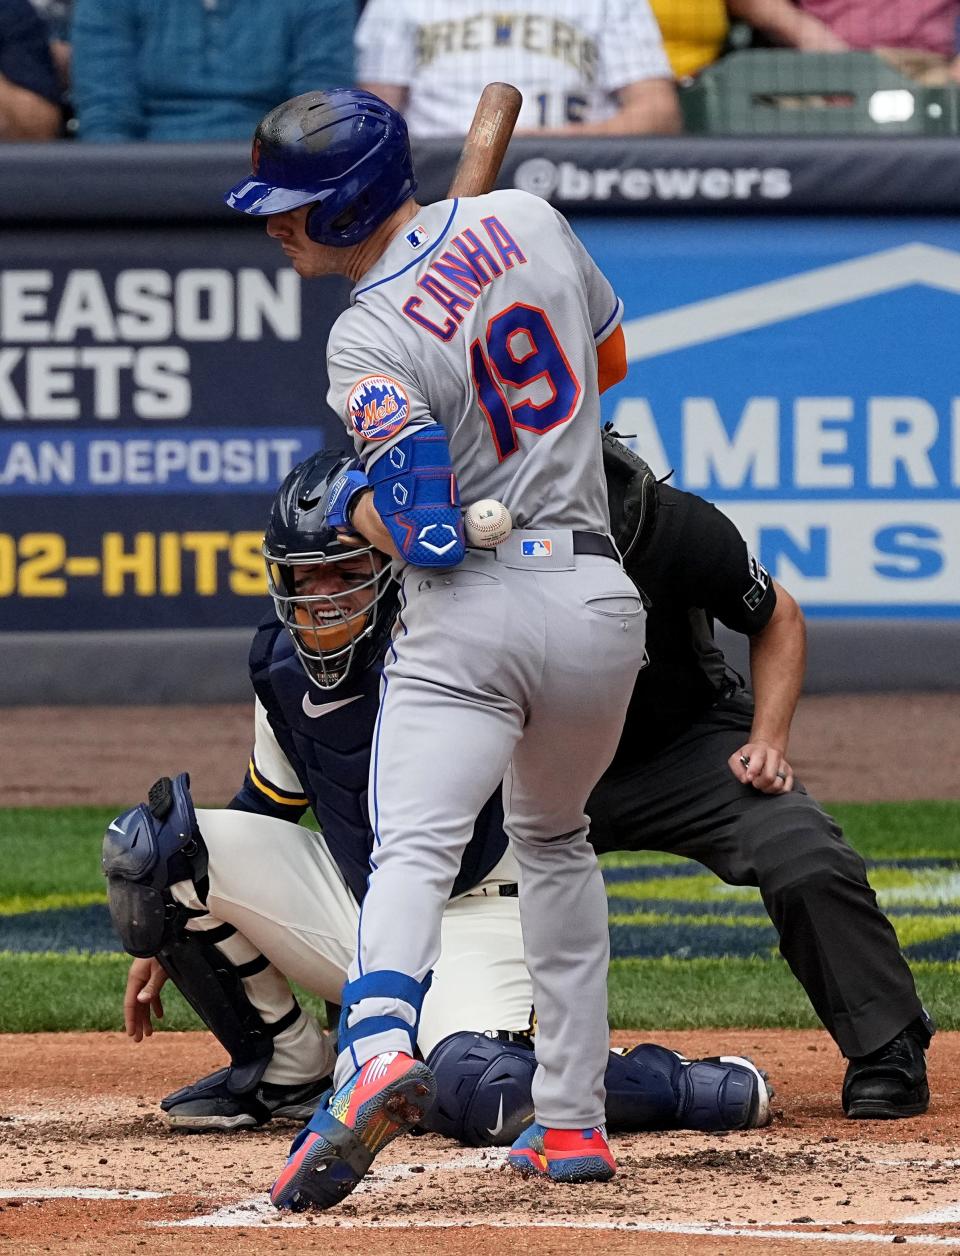 New York Mets left fielder Mark Canha (19) is hit by a pitch thrown by Milwaukee Brewers starting pitcher Adrian Houser during the fifth inning of their game Wednesday, September 21, 2022 at American Family Field in Milwaukee, Wis.